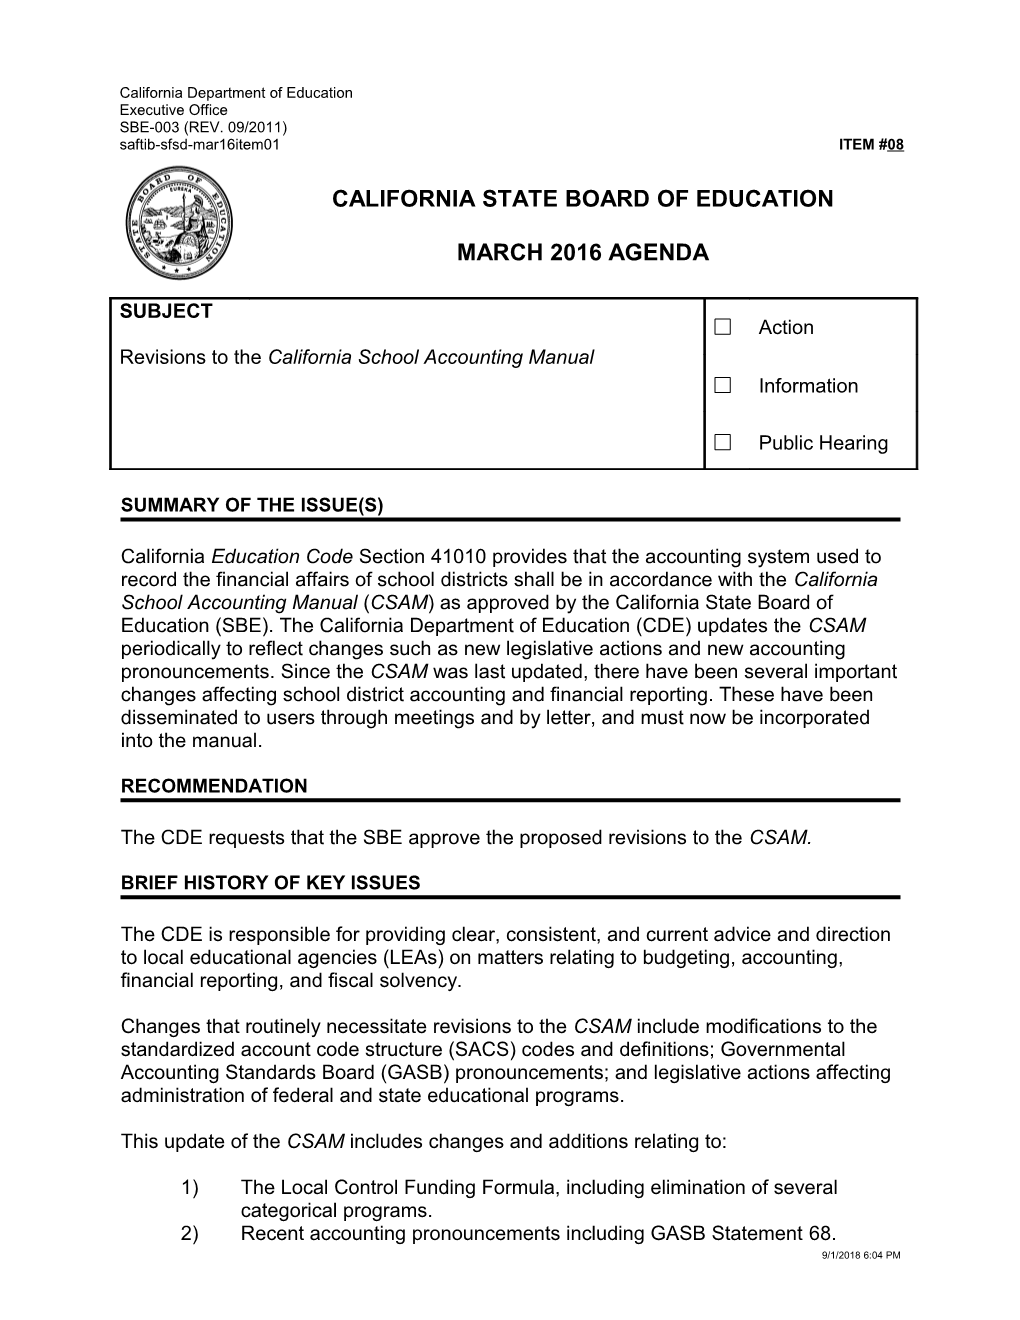 March 2016 Agenda Item 08 - Meeting Agendas (CA State Board of Education)